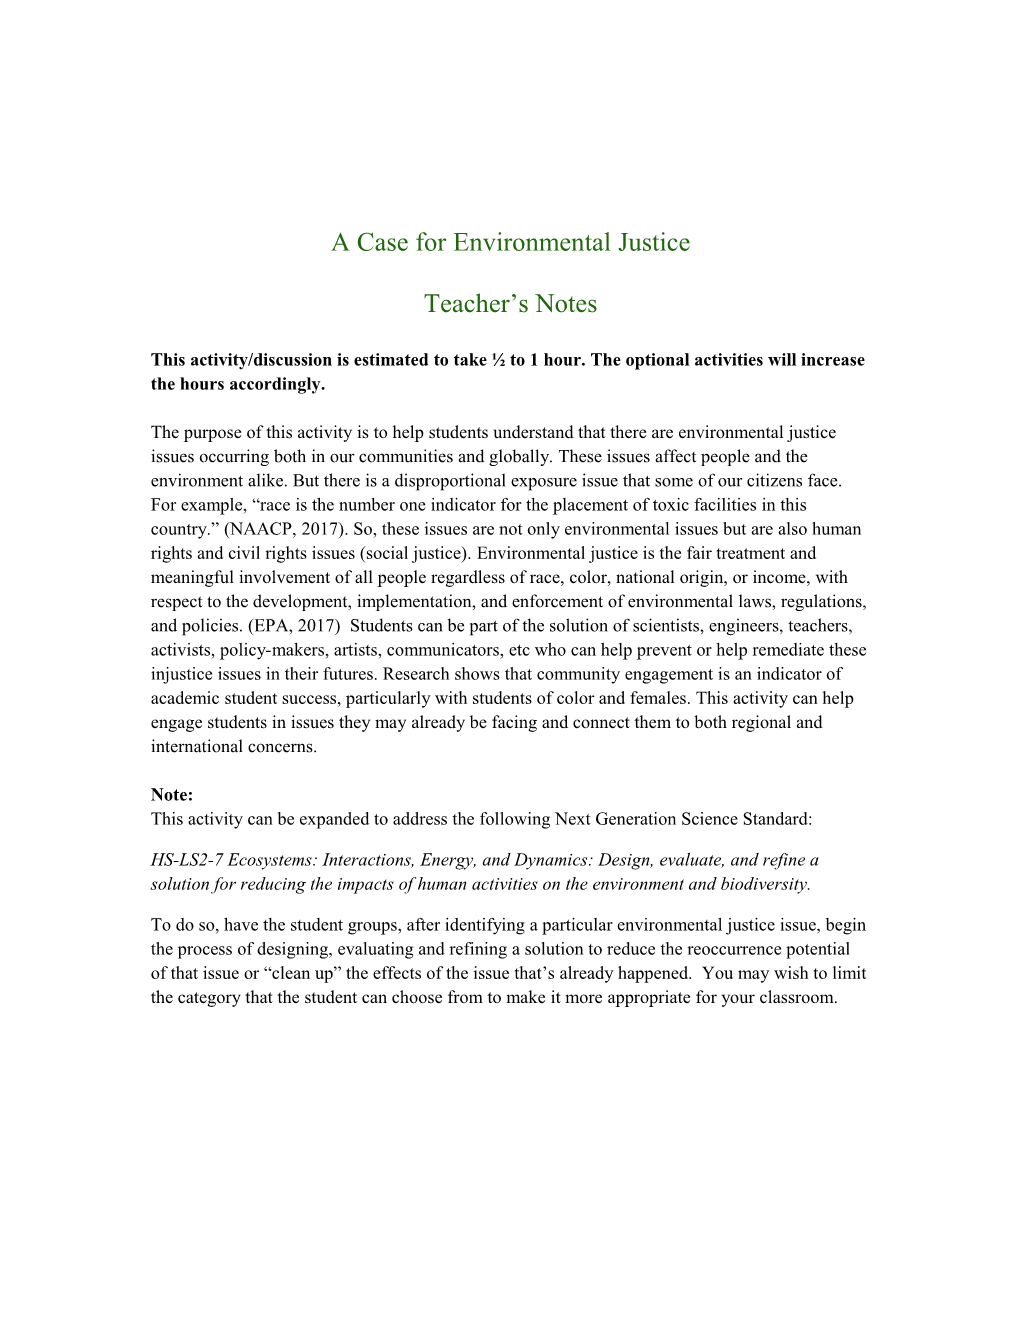 A Case for Environmental Justice